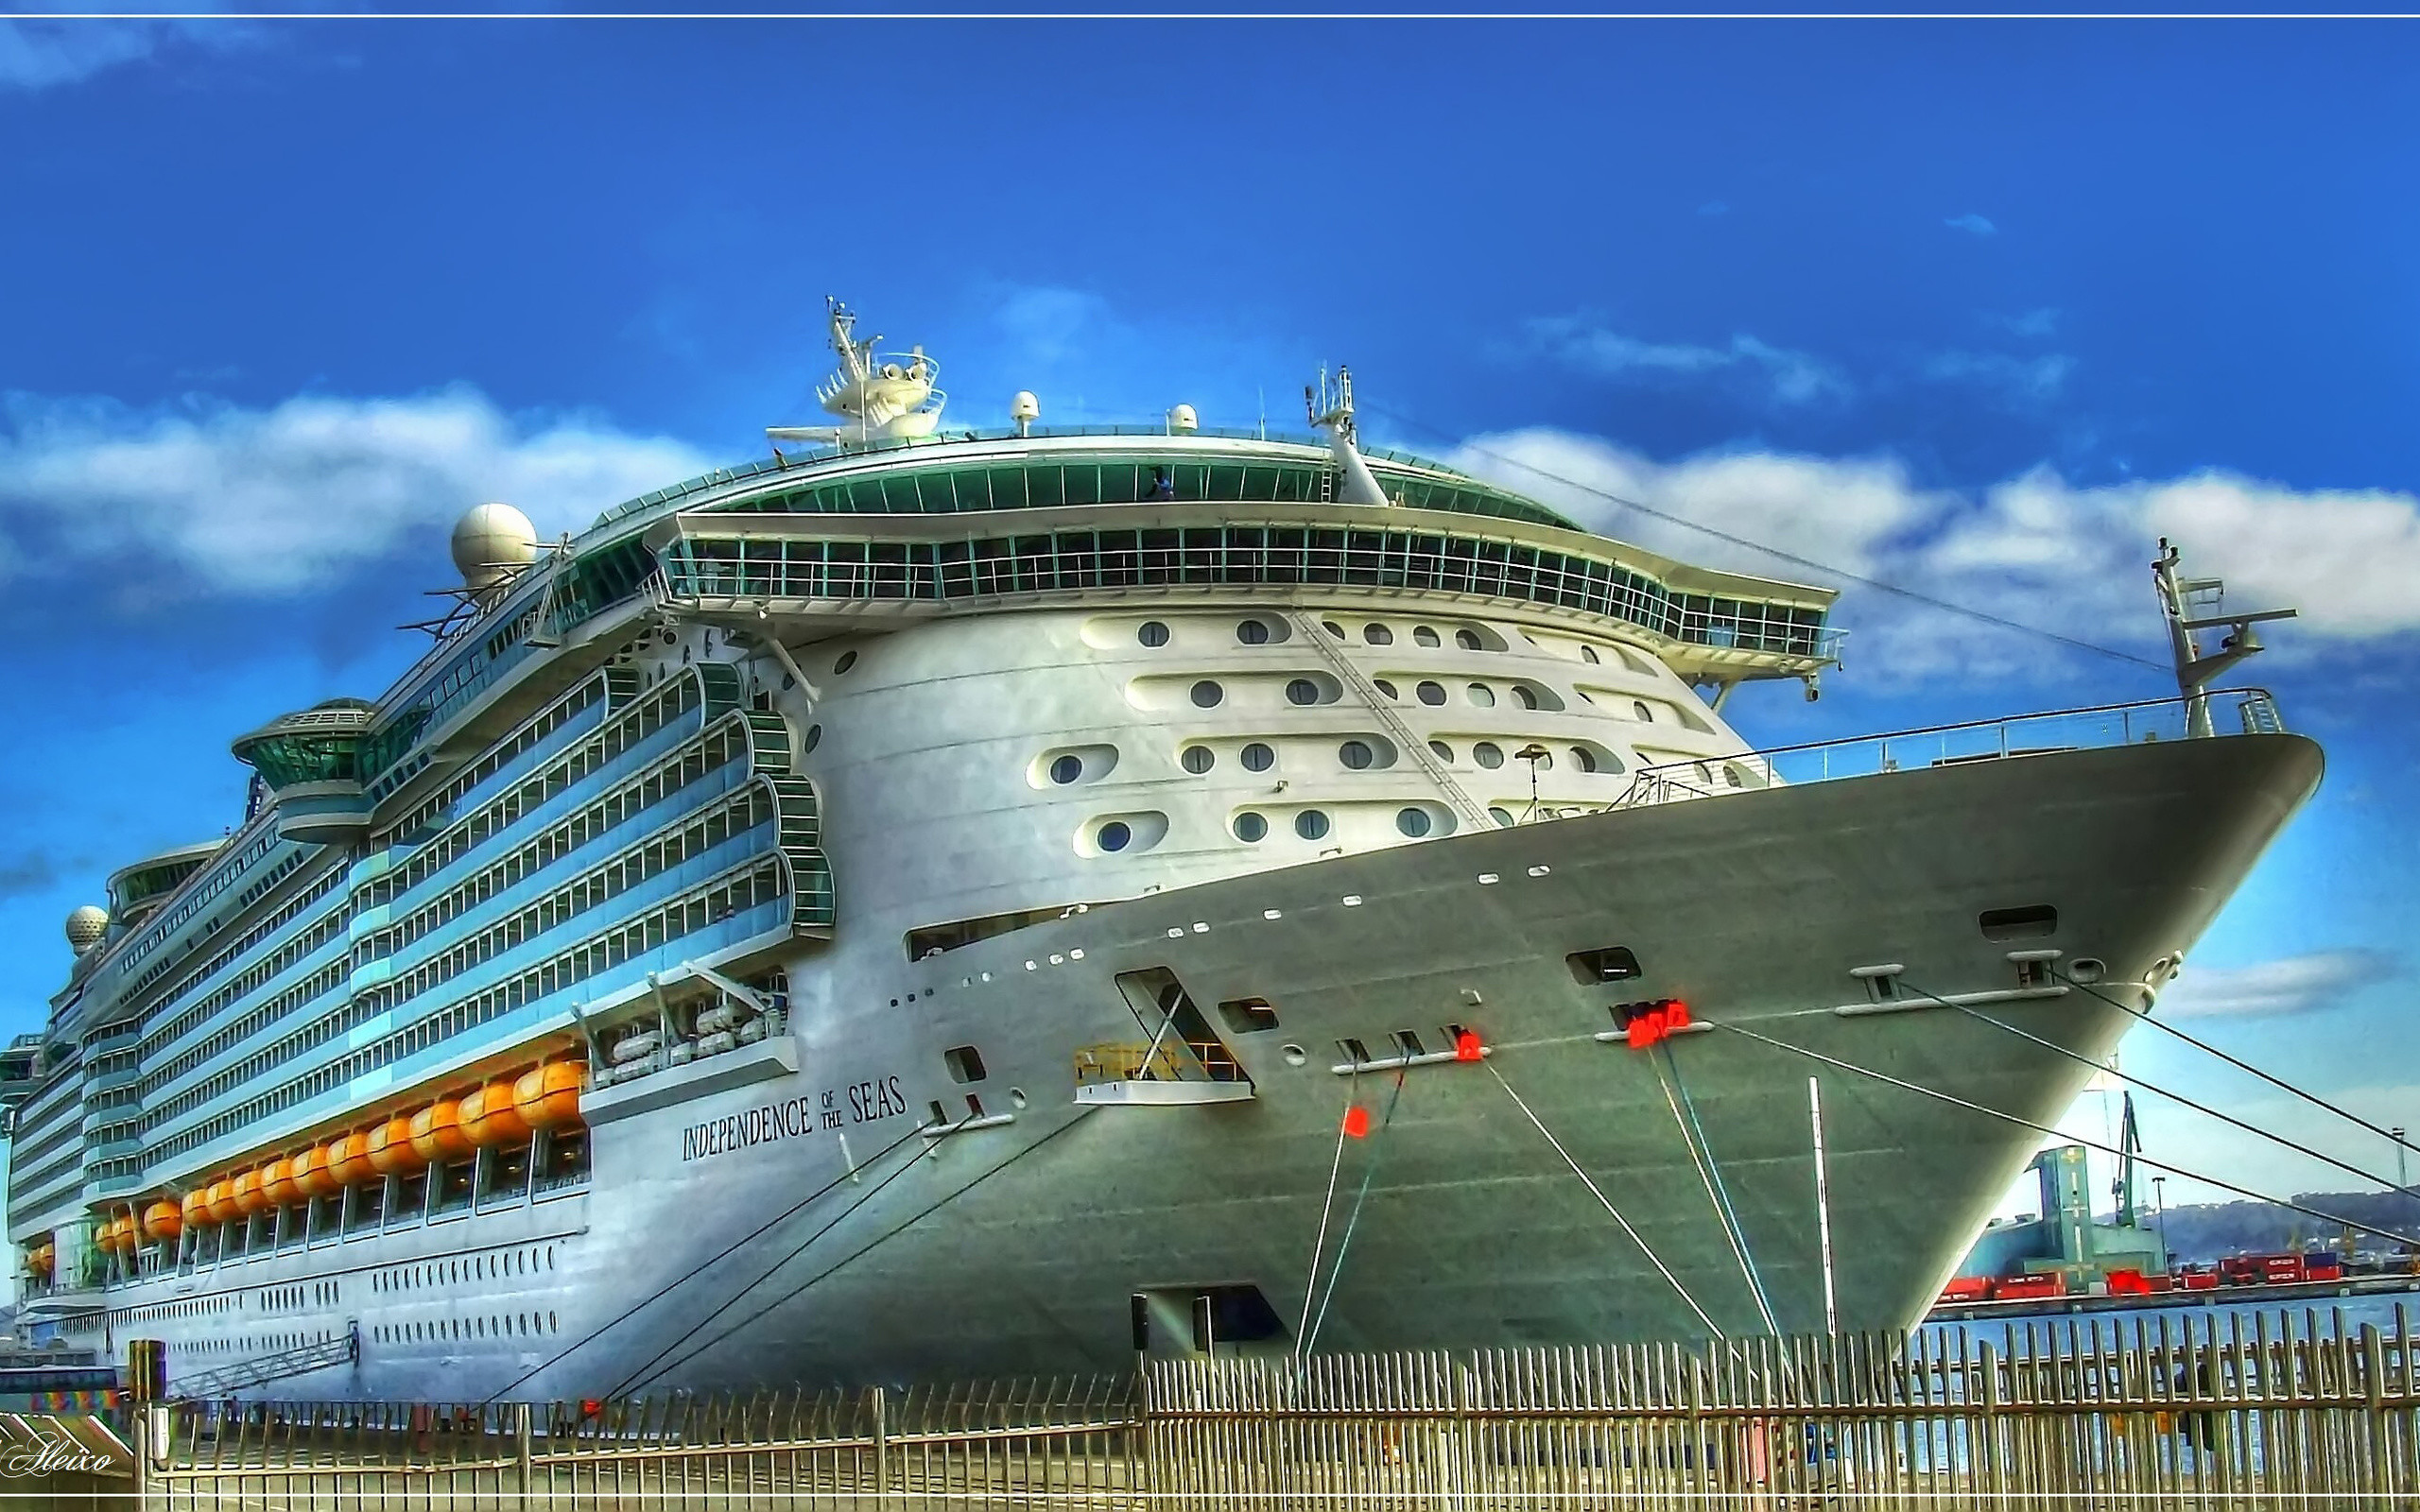 Cruise ships best wallpapers – My Free Wallpapers Hub